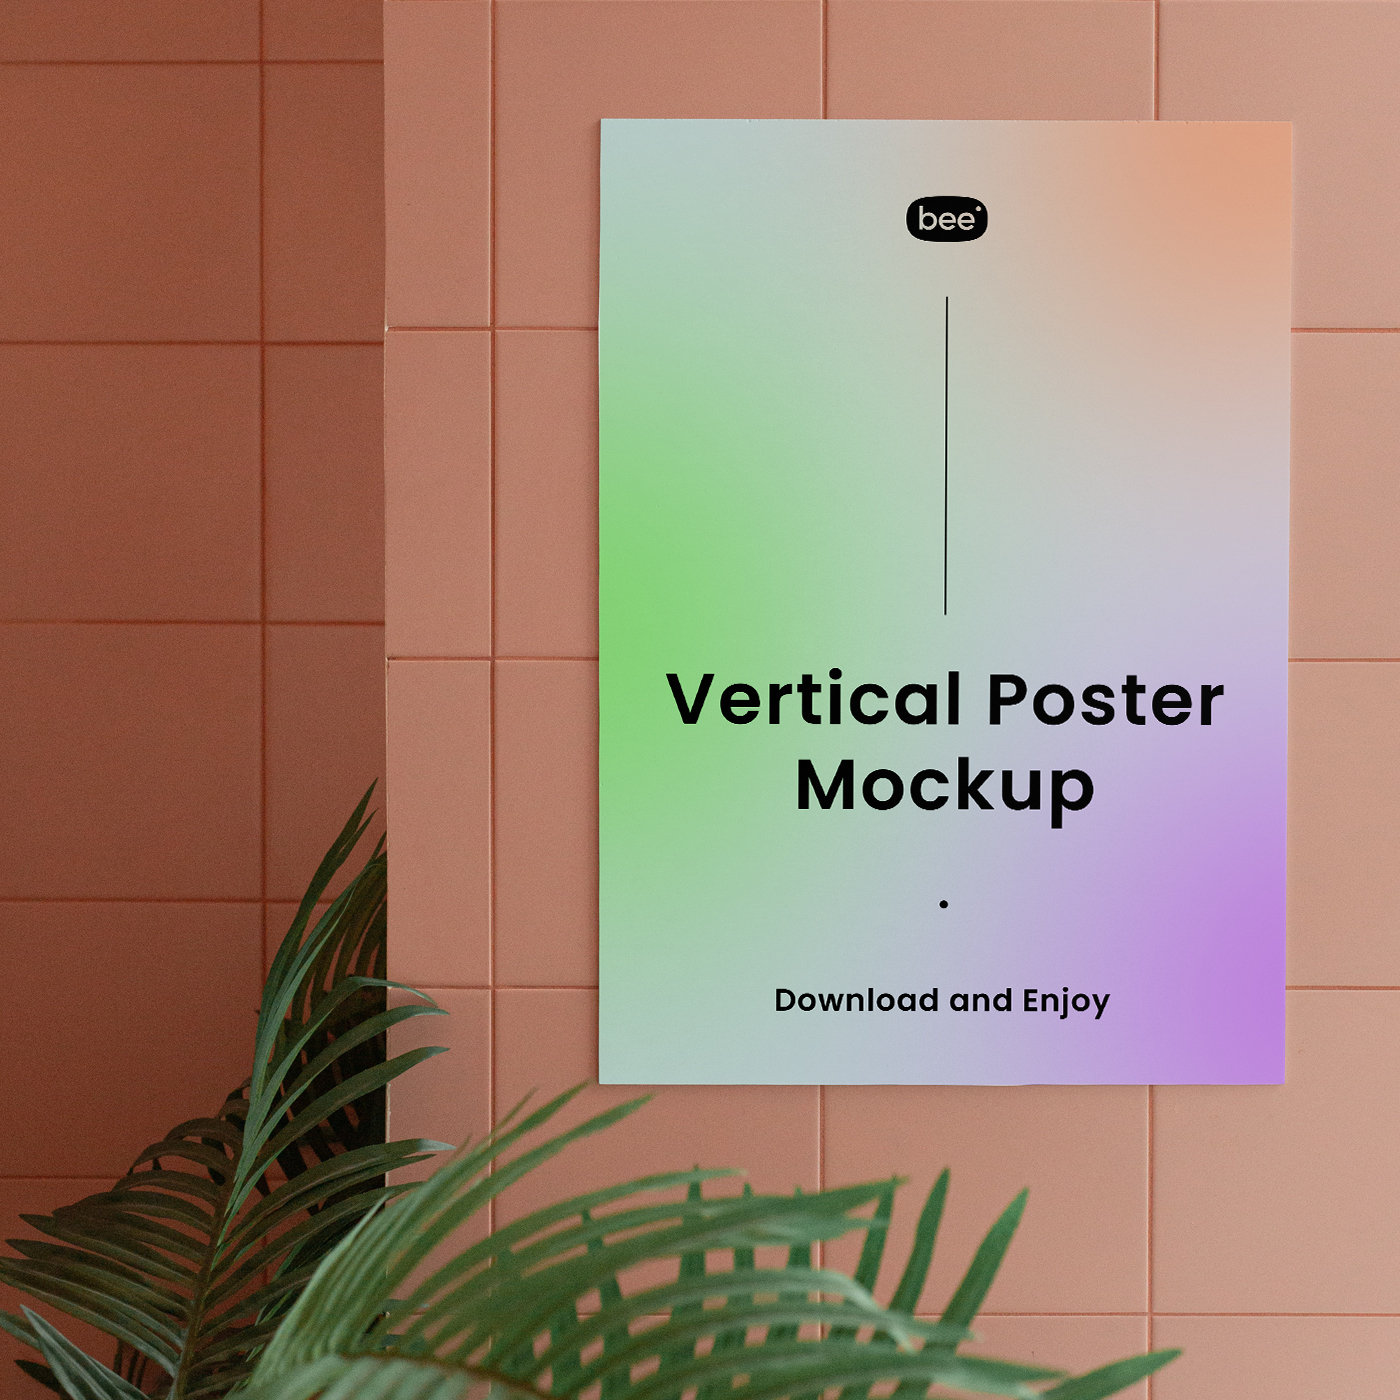 Front View of Vertical Poster Mockup on Ceramic Wall